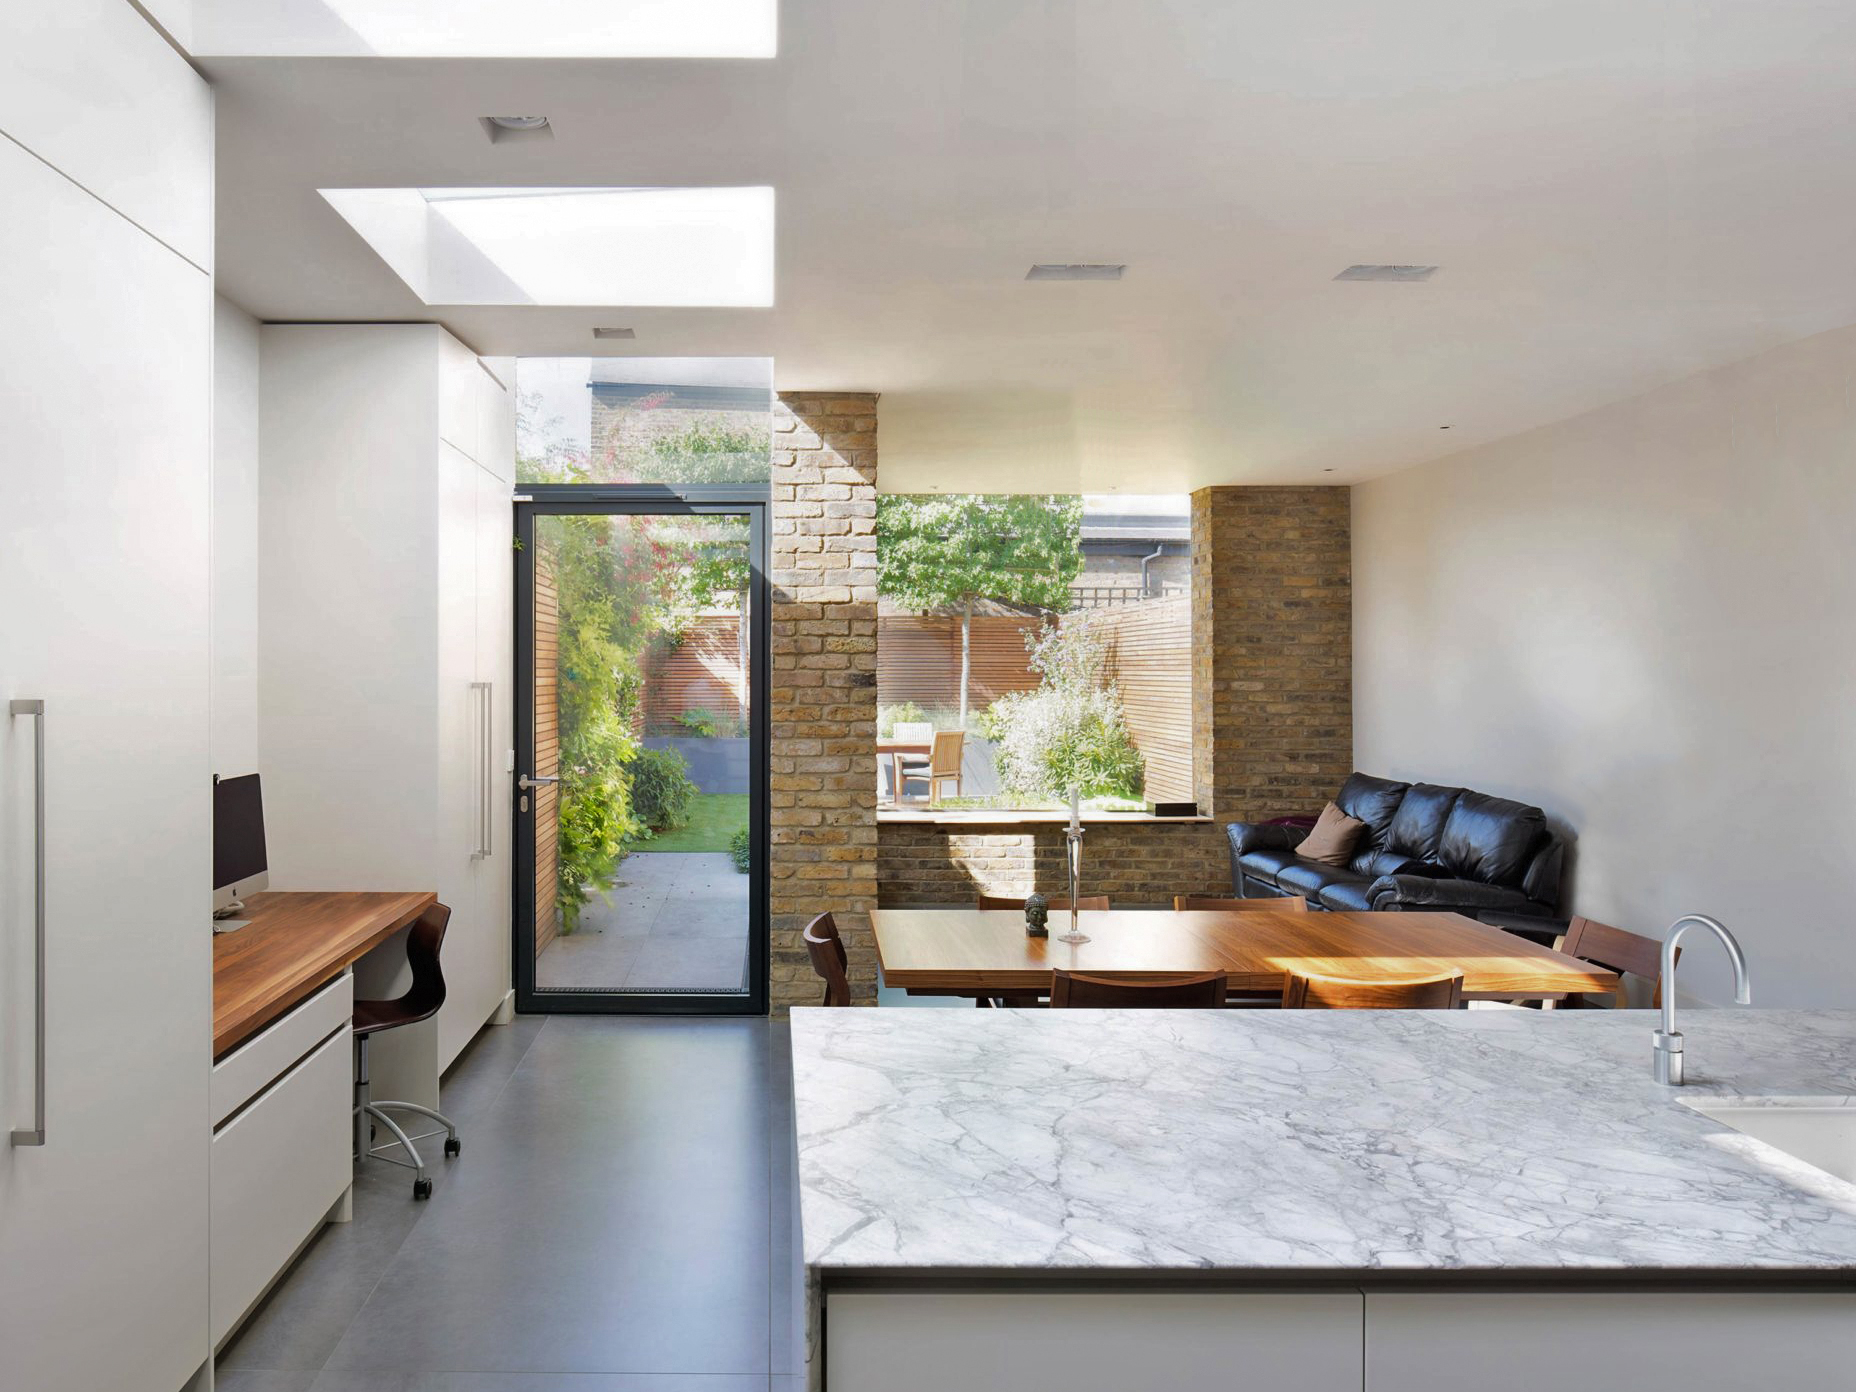 </p> <p>Find your ideal home design pro on designfor-me.com - get matched and see who's interested in your home project. Click image to see more inspiration from our design pros</p> <p>Design by Mark, architect from Haringey, London</p> <p>#architecture #homedesign #modernhomes #homeinspiration #exposedbrick #skylights #rooflights </p> <p>